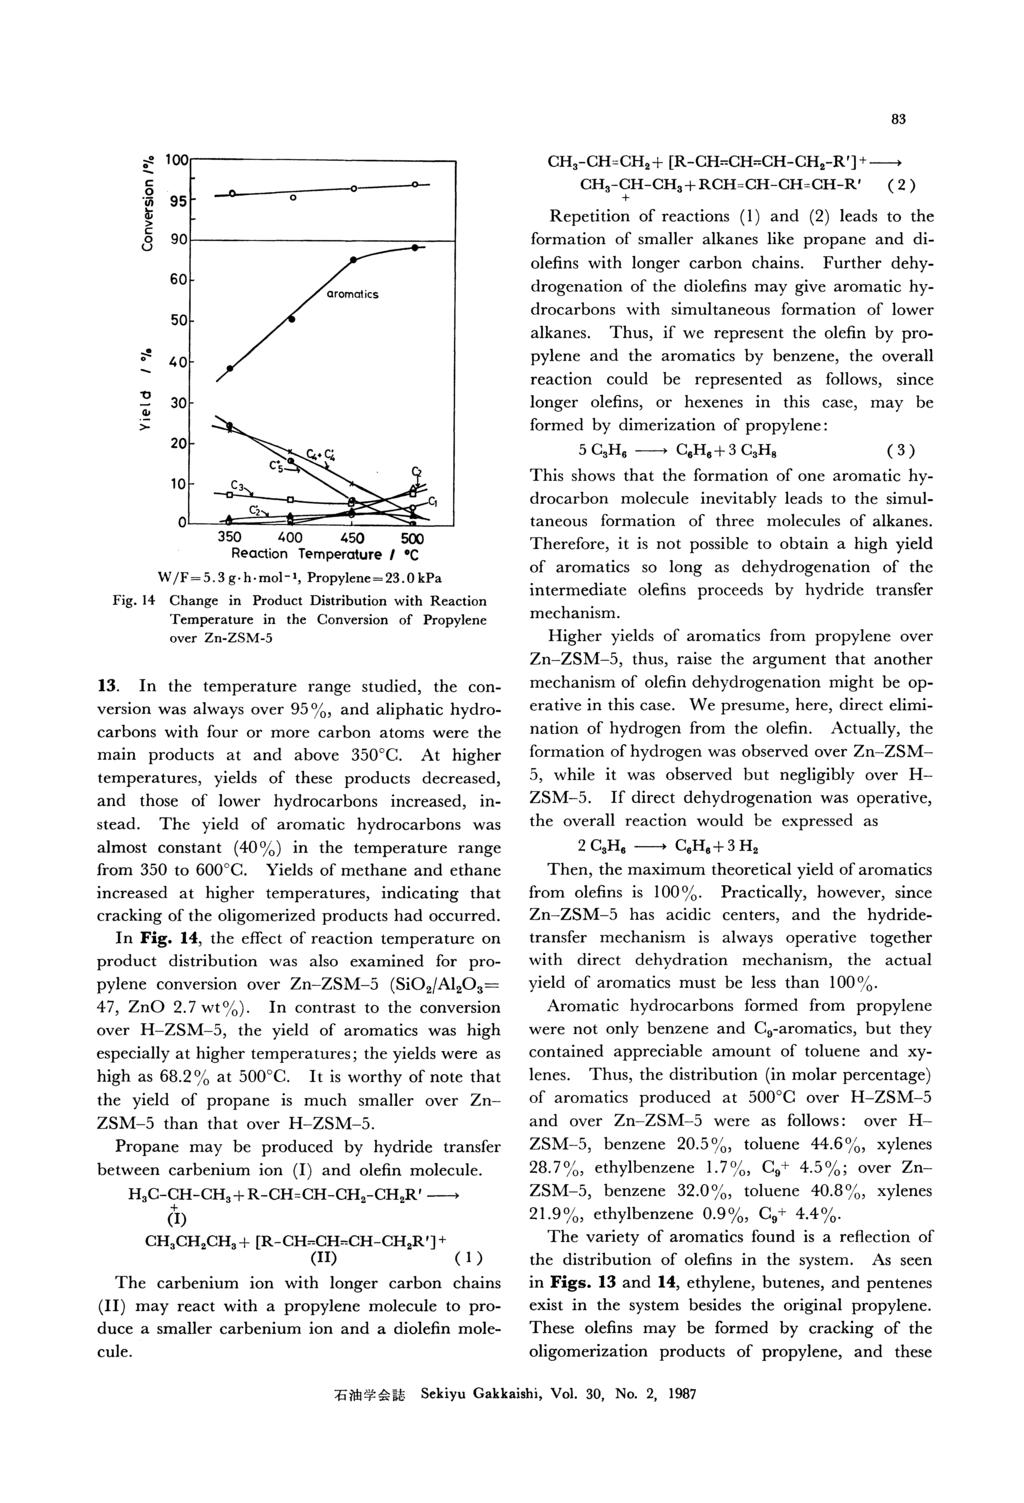 Fig. 14 Change in Product Distribution with Reaction Temperature in the Conversion of Propylene over Zn-ZSM-5 13.